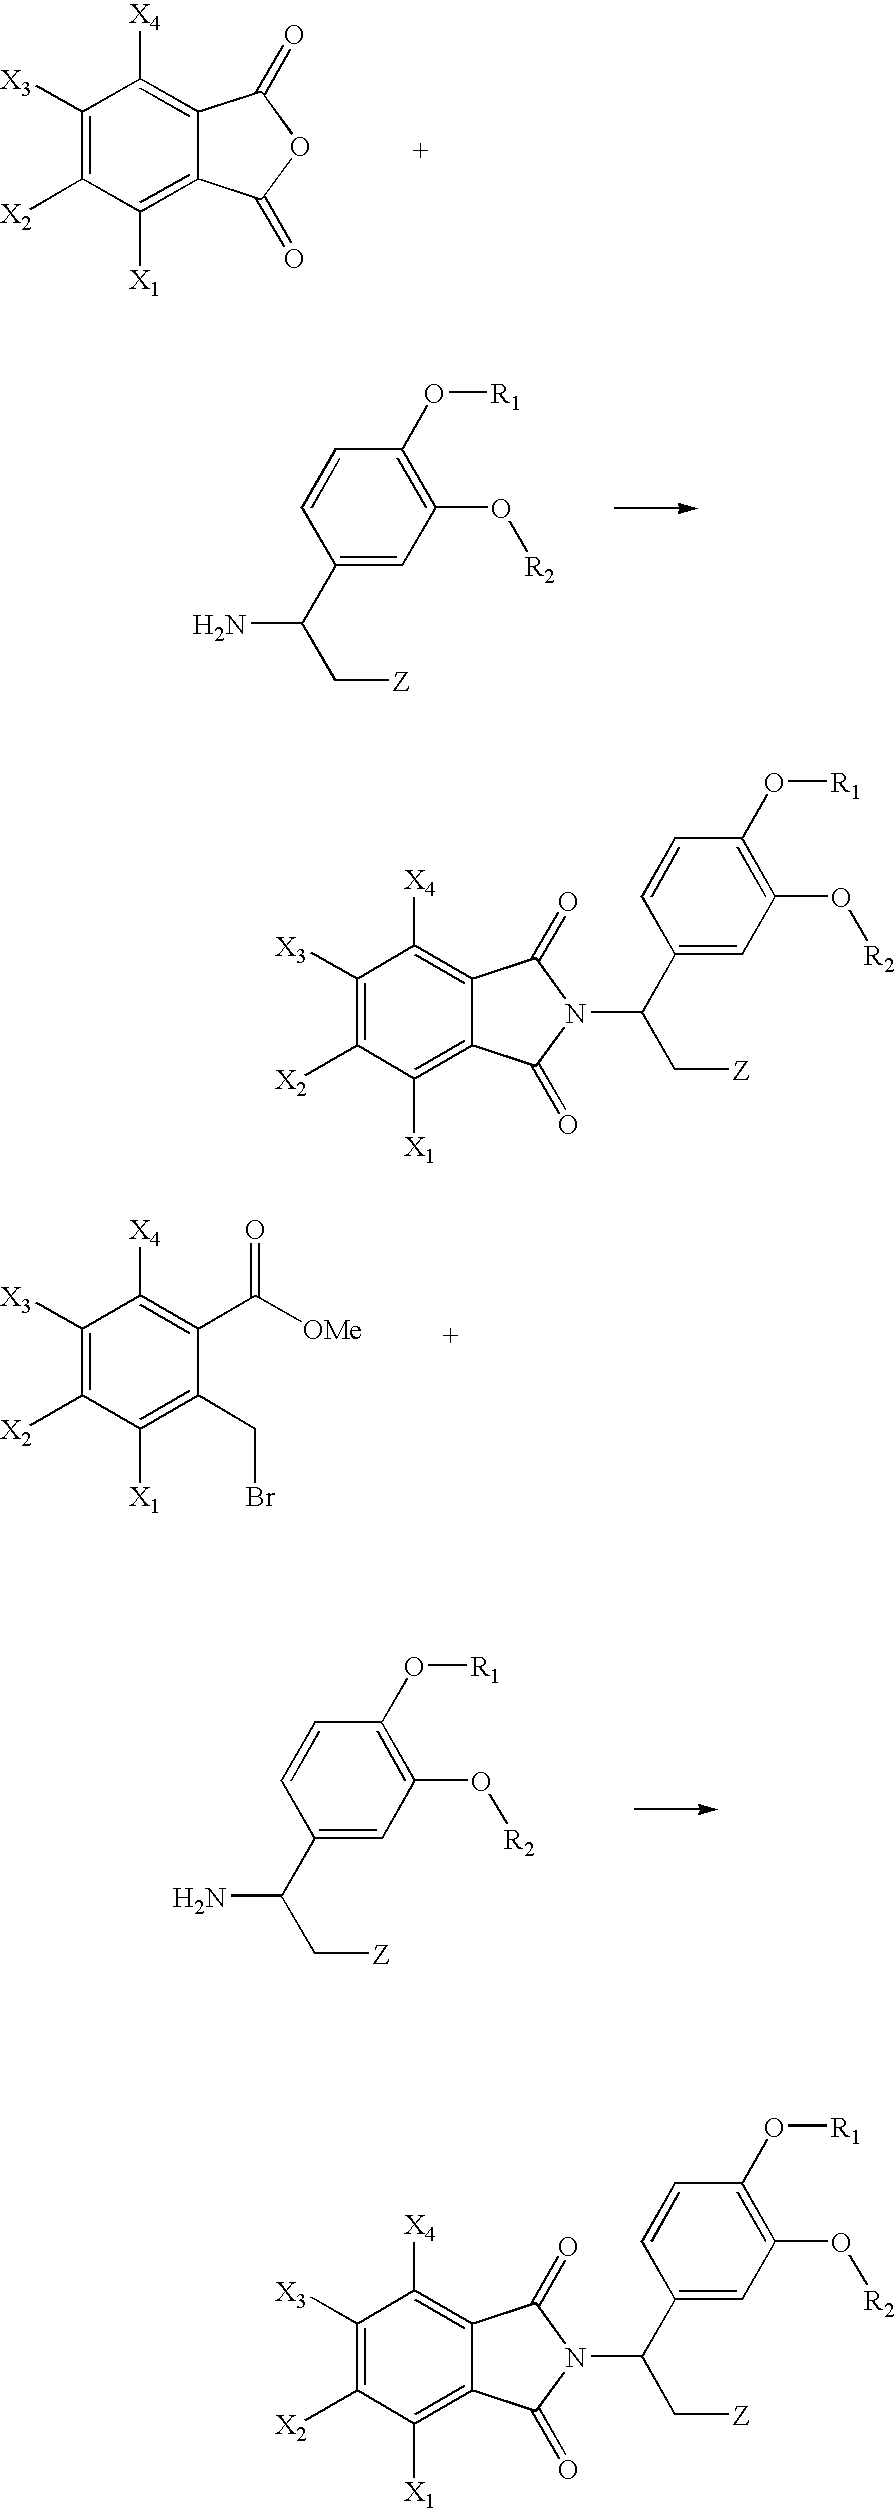 Fluoroalkoxy-substituted 1,3-dihydro-isoindolyl compounds and their pharmaceutical uses